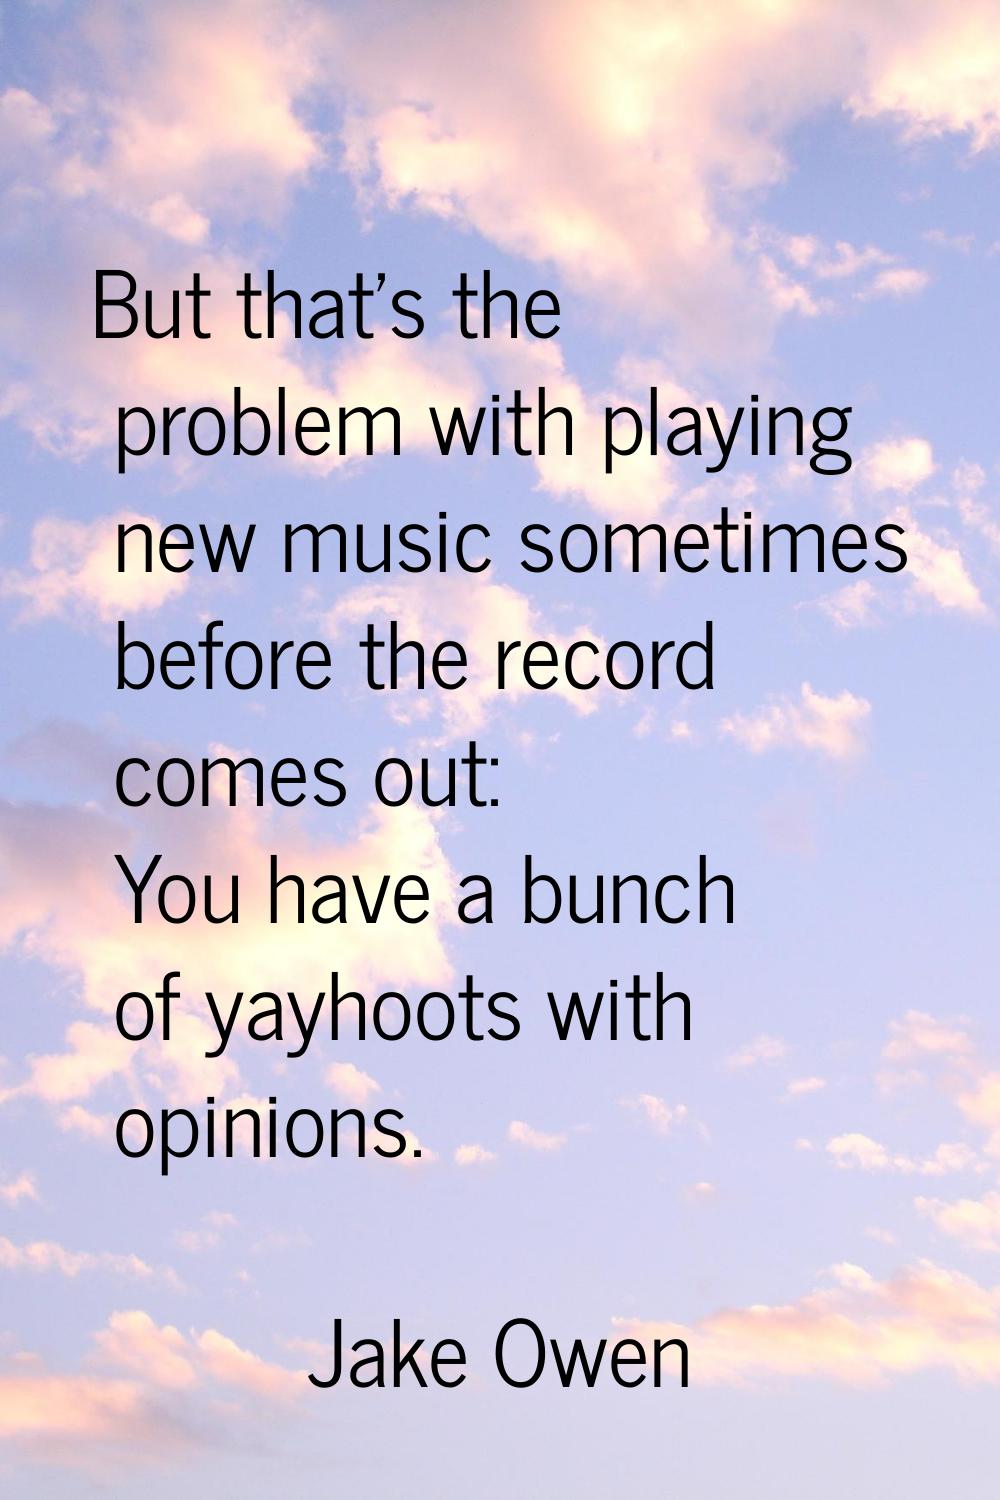 But that's the problem with playing new music sometimes before the record comes out: You have a bun